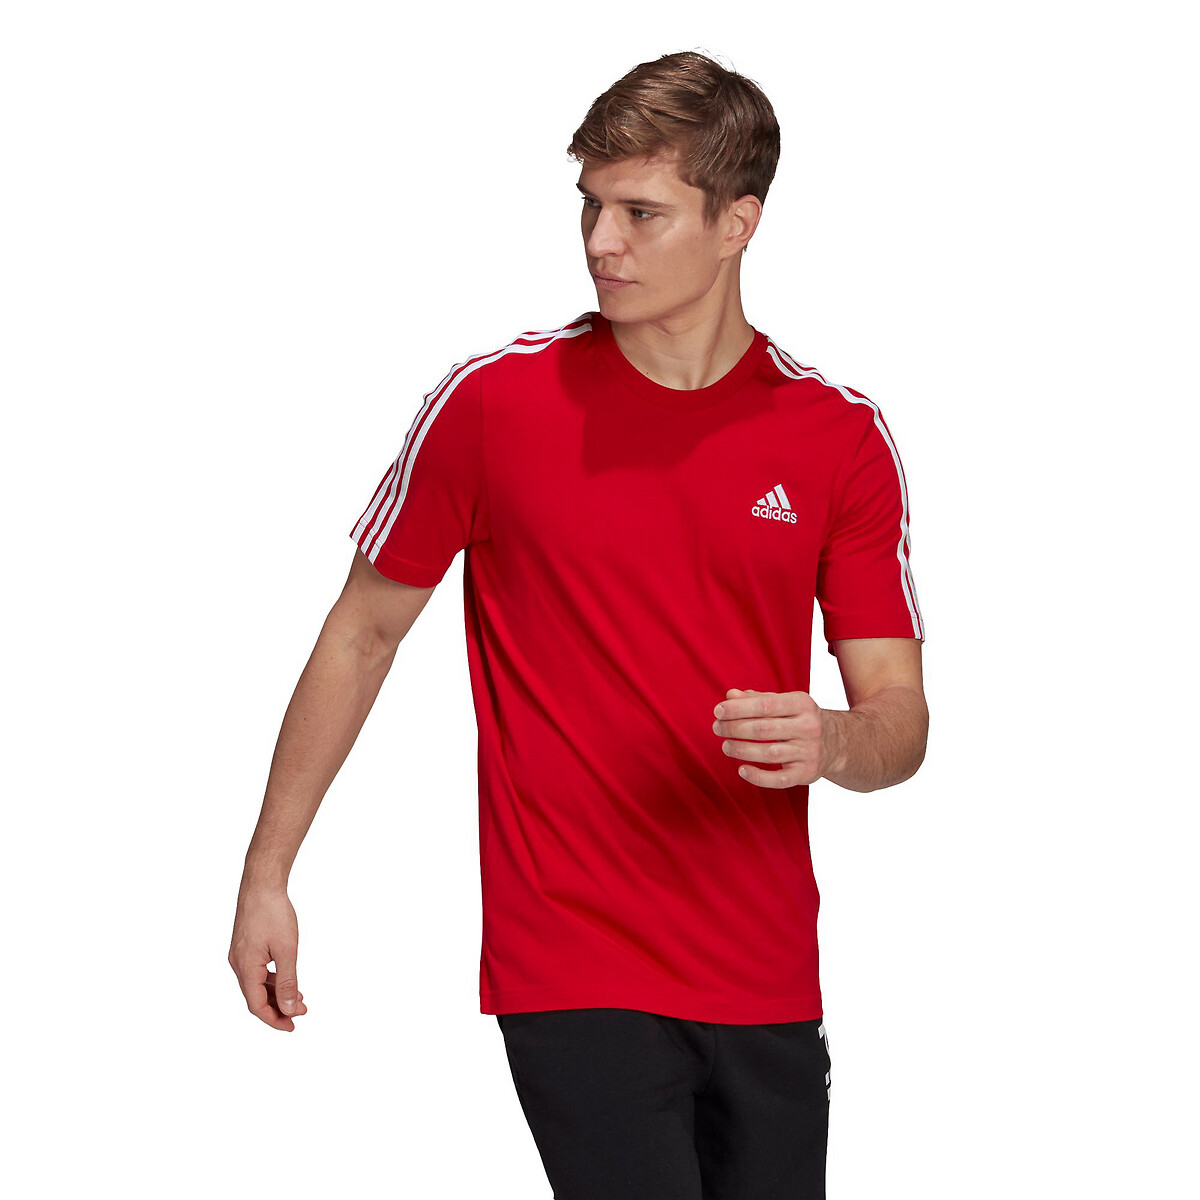 Cotton short sleeve t-shirt with 3 shoulder stripes , red, Adidas ...